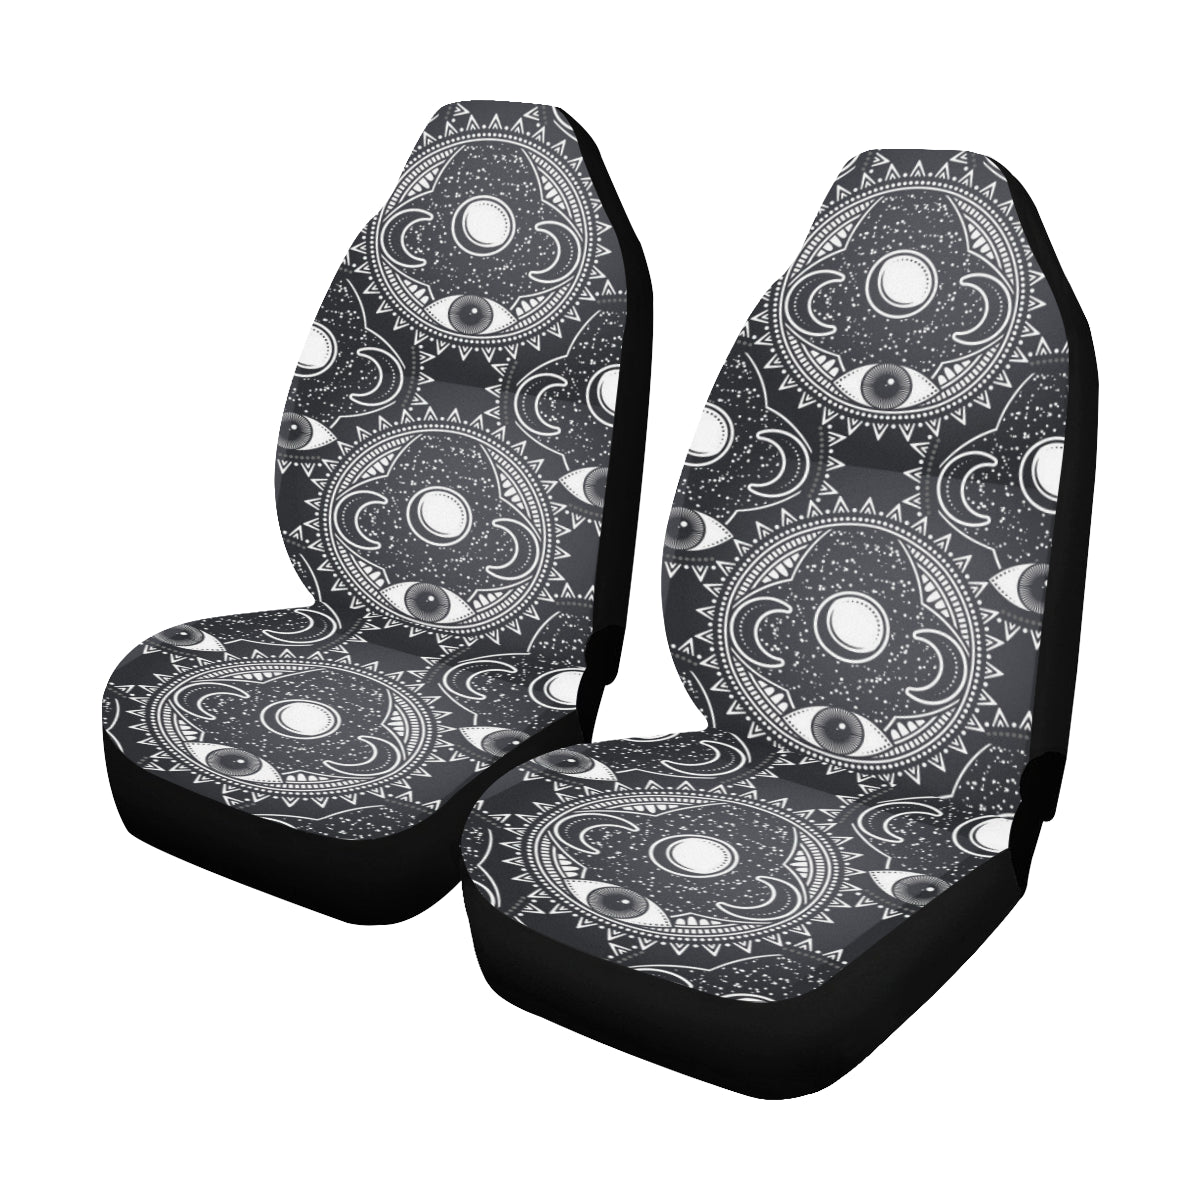 Mandala Moon Sun Car Seat Covers 2 pc Retro Sky Asian Front Seat Covers for Vehicle, Boho Car SUV Truck Protector Accessory Decoration Starcove Fashion